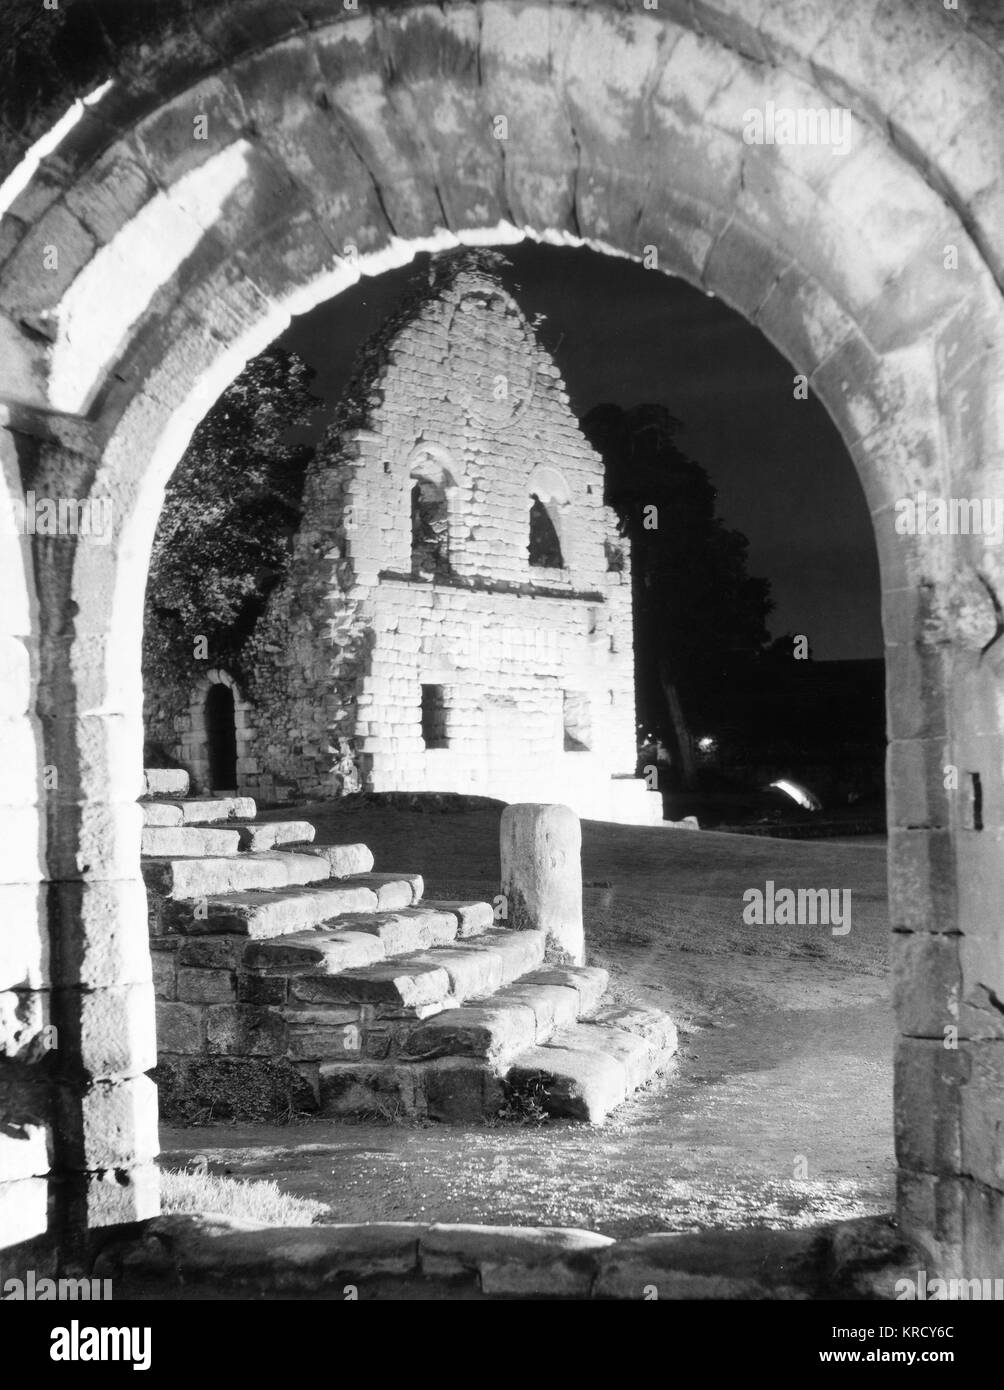 Night study of the floodlit Guest House and Monks' Day Stairs of f Fountains Abbey, Yorkshire, England, a Cistercian abbey, founded in 1132. Stock Photo